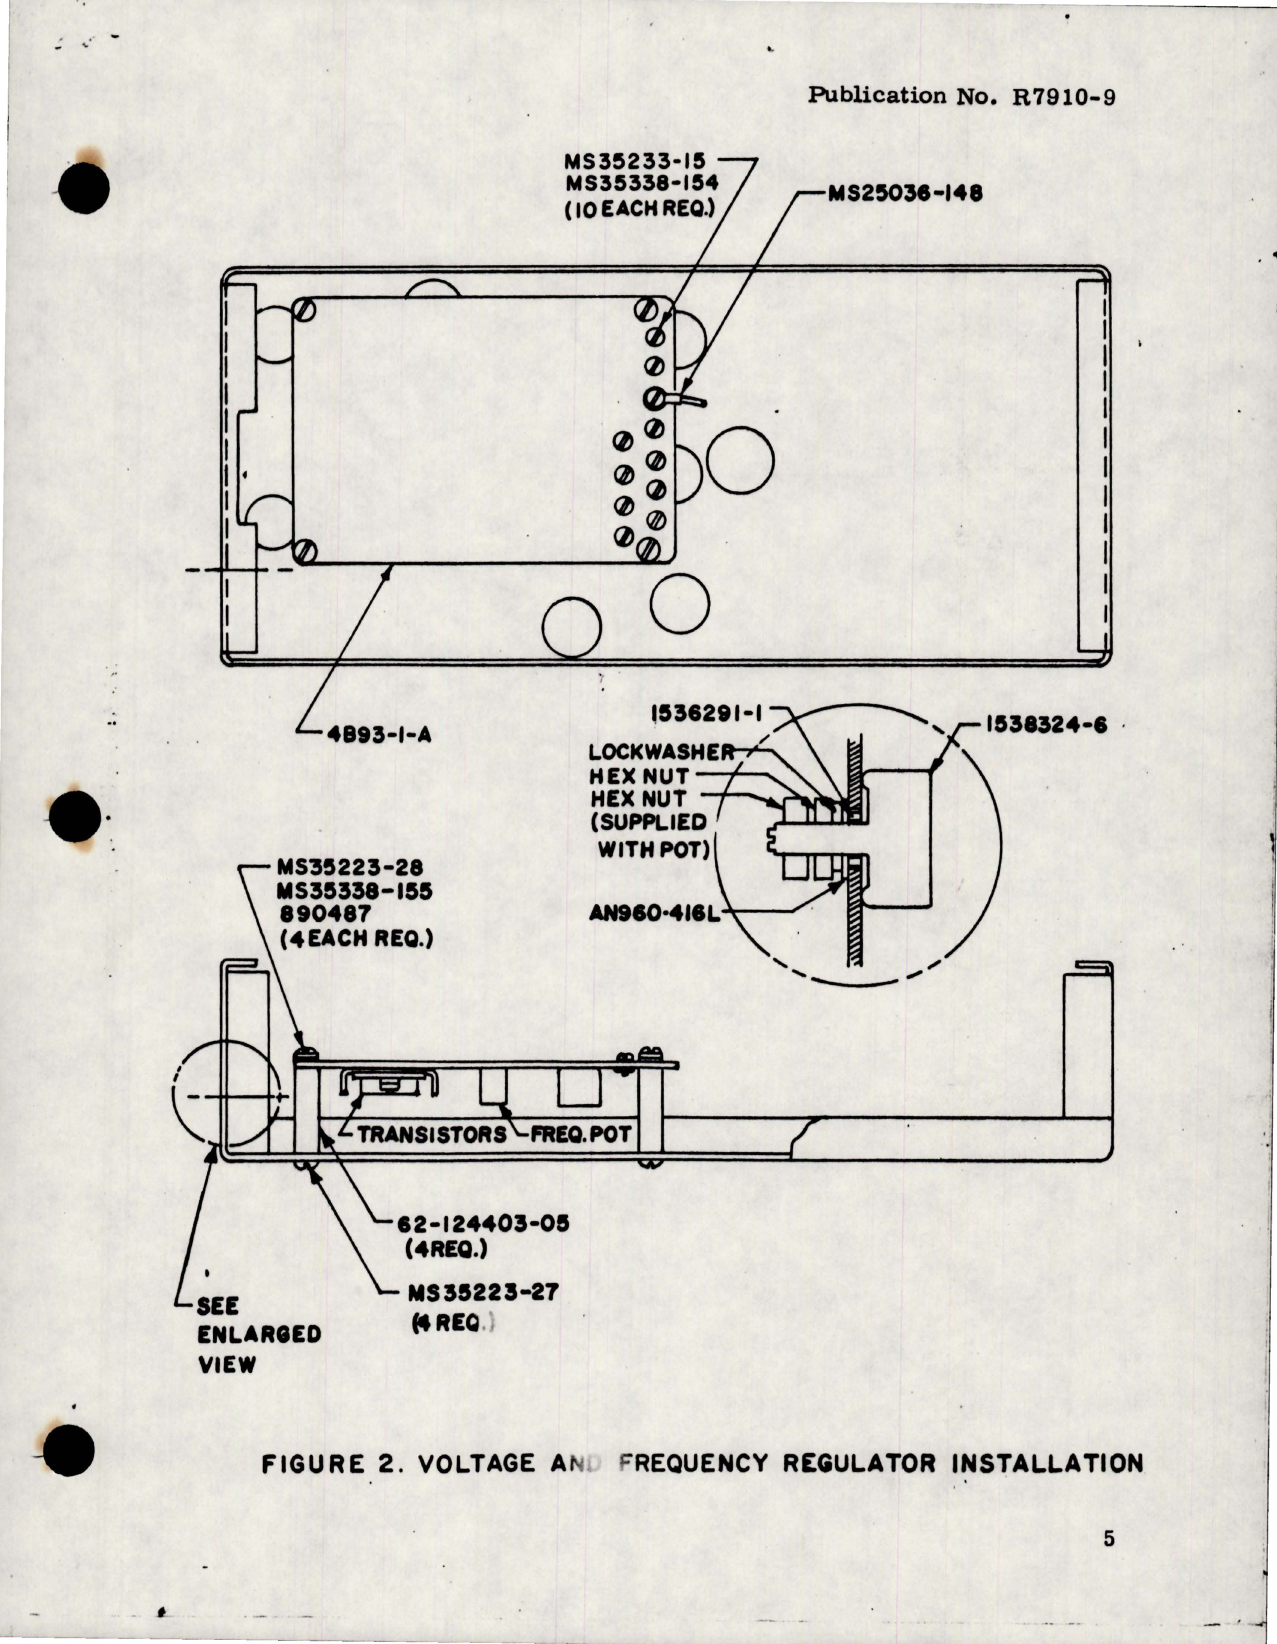 Sample page 5 from AirCorps Library document: Service Bulletin No. R-383, Installation of Voltage and Frequency Regulator Kit - Type 4B93-30-A 